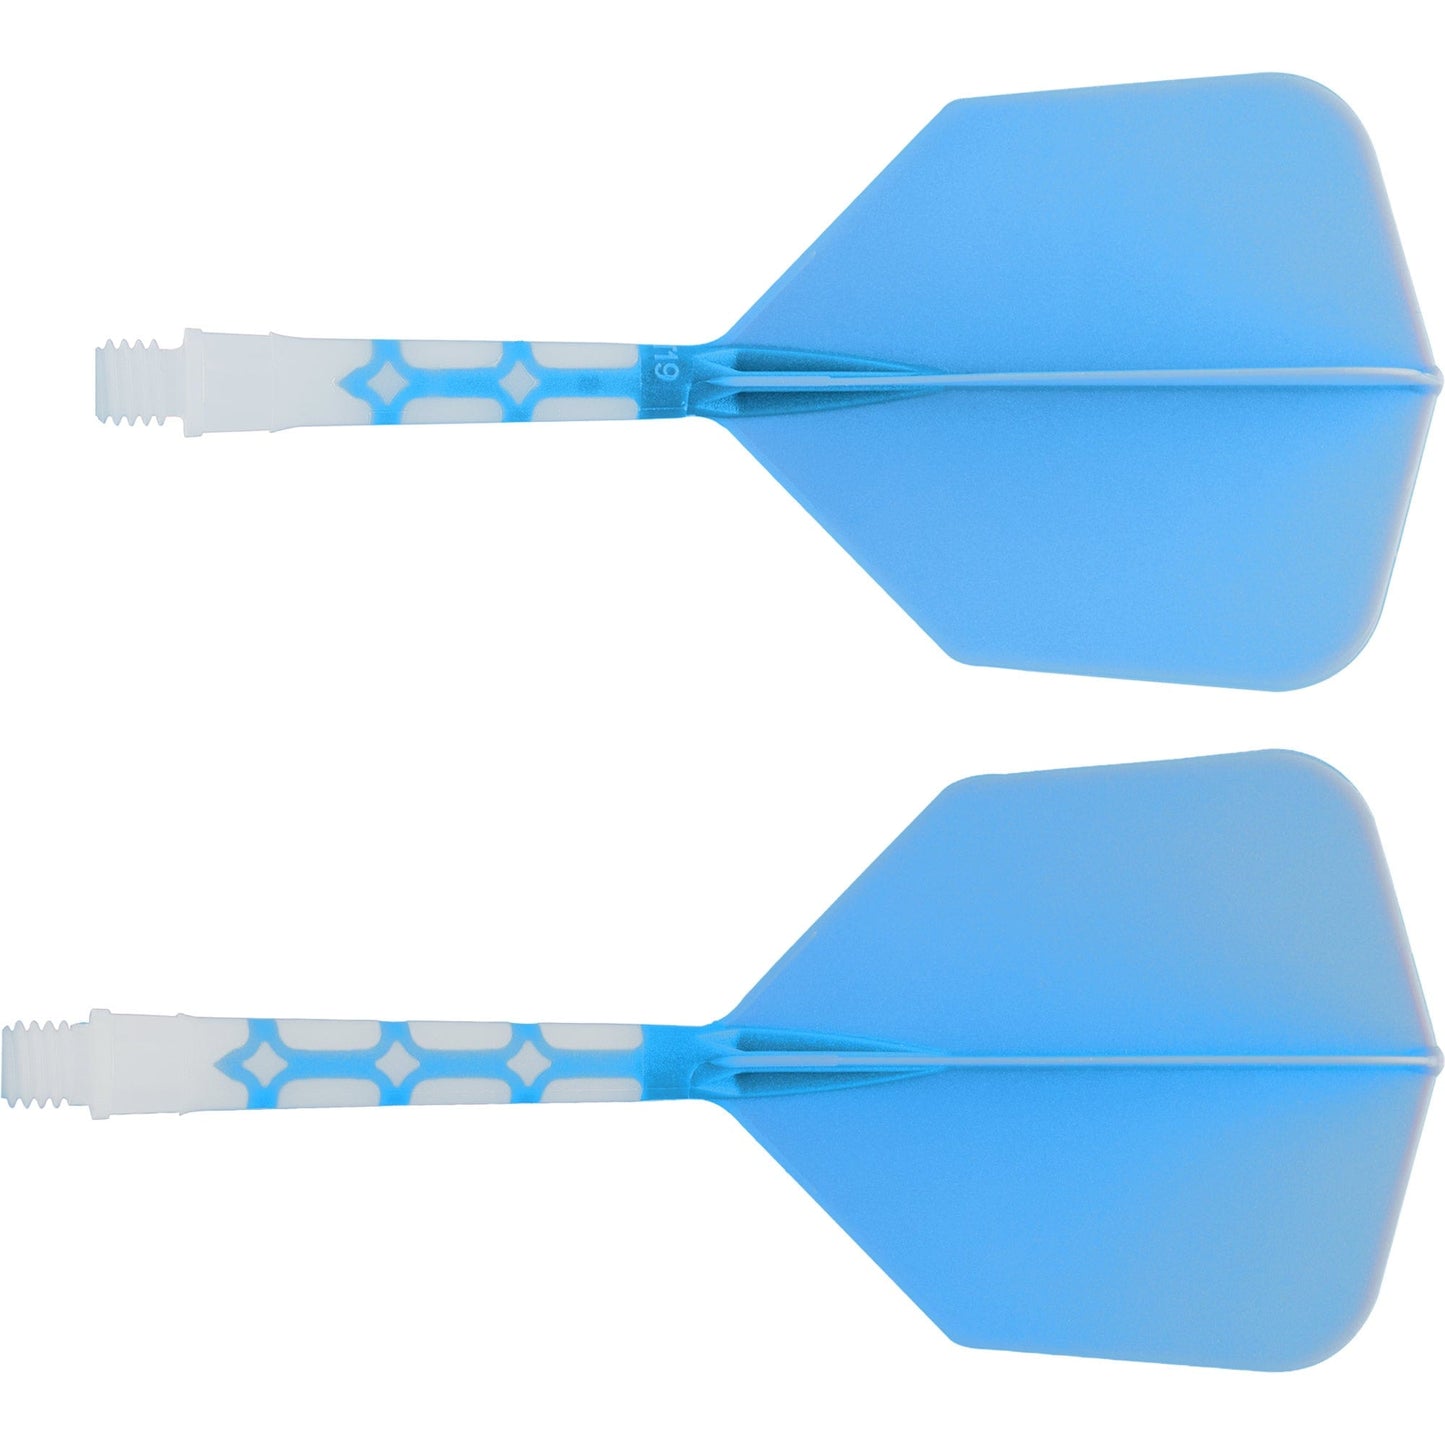 Cuesoul Rost T19 Integrated Dart Shaft and Flights - Big Wing - White with Blue Flight